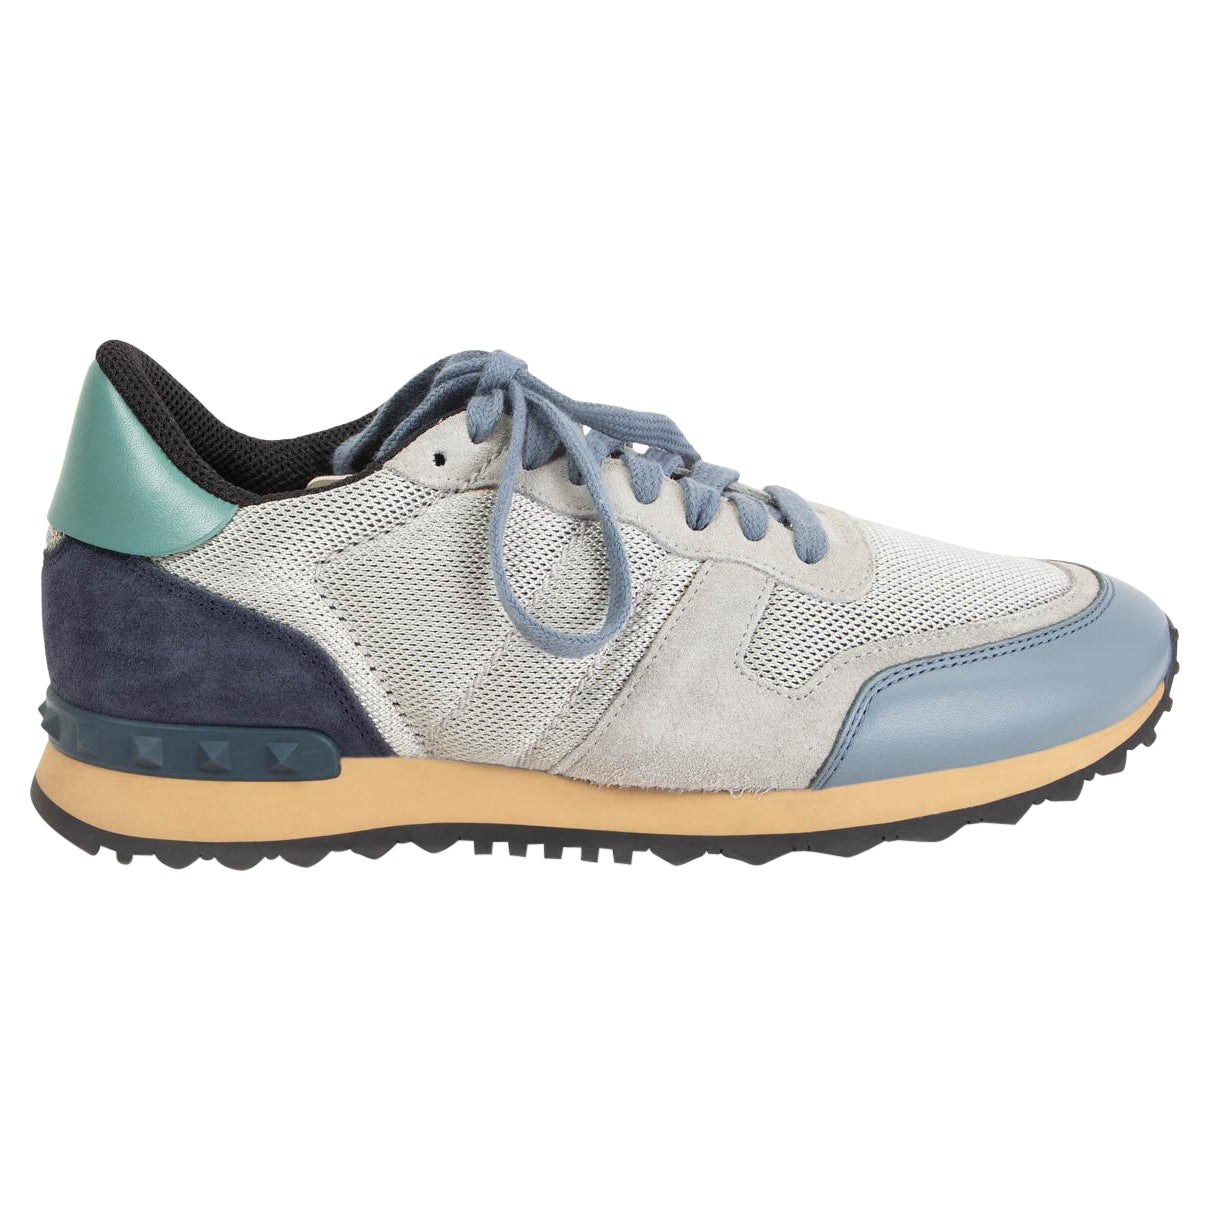 VALENTINO blue grey mesh ROCKRUNNER Sneakers Shoes 39